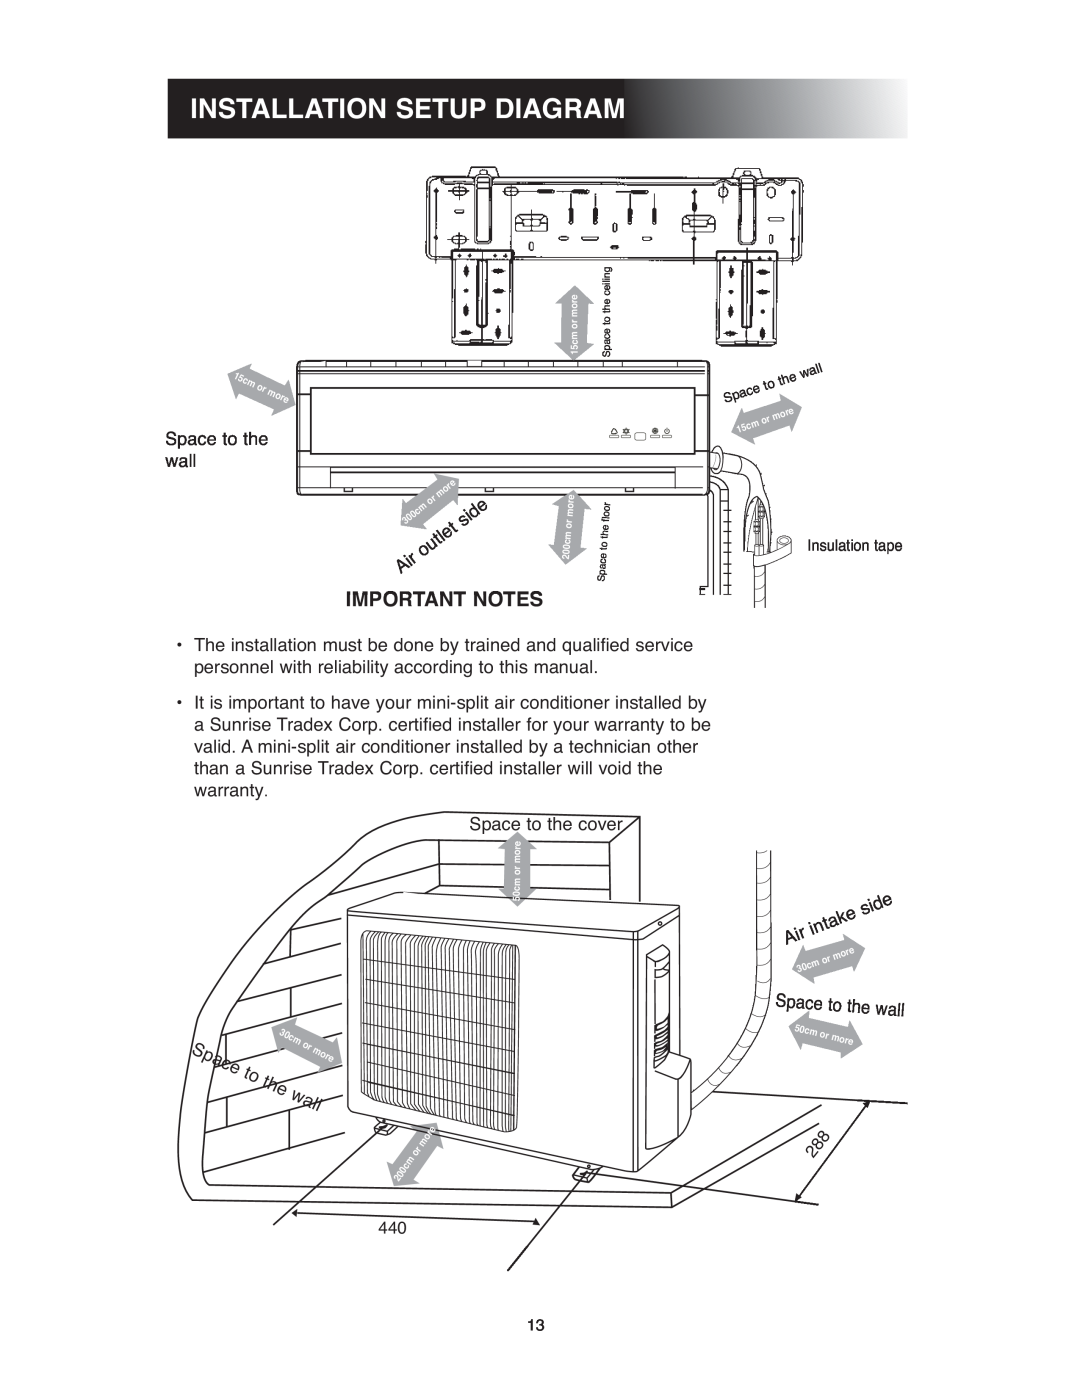 Sunrise Global 13-05024, 13-05020 owner manual Installation Setup Diagram, Important Notes, Space to 